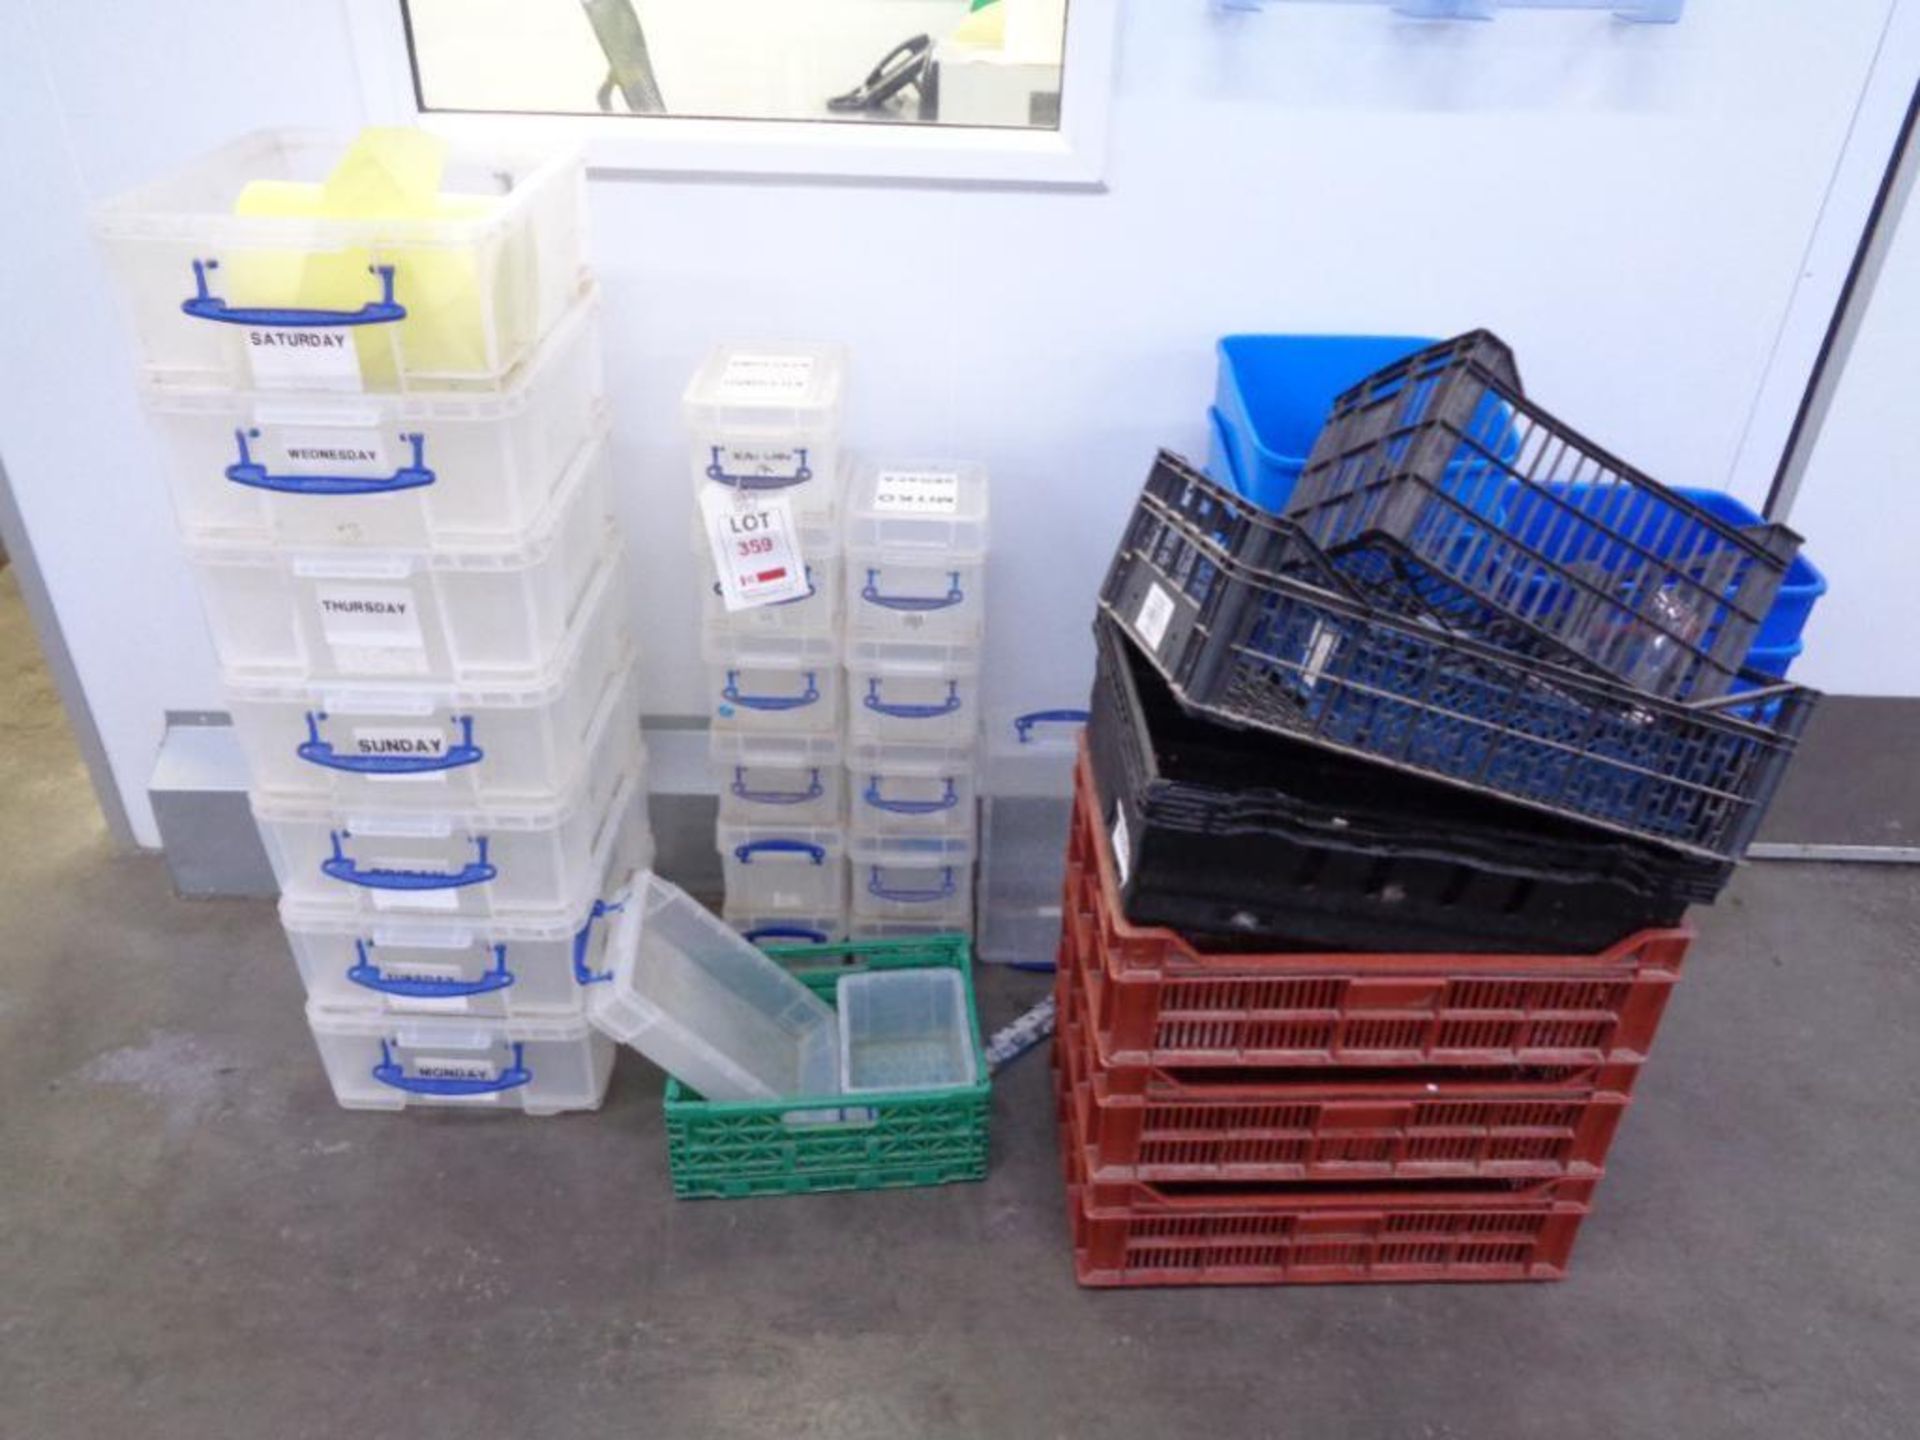 Nineteen assorted clear plastic boxes, assorted crates and eight blue waste bins